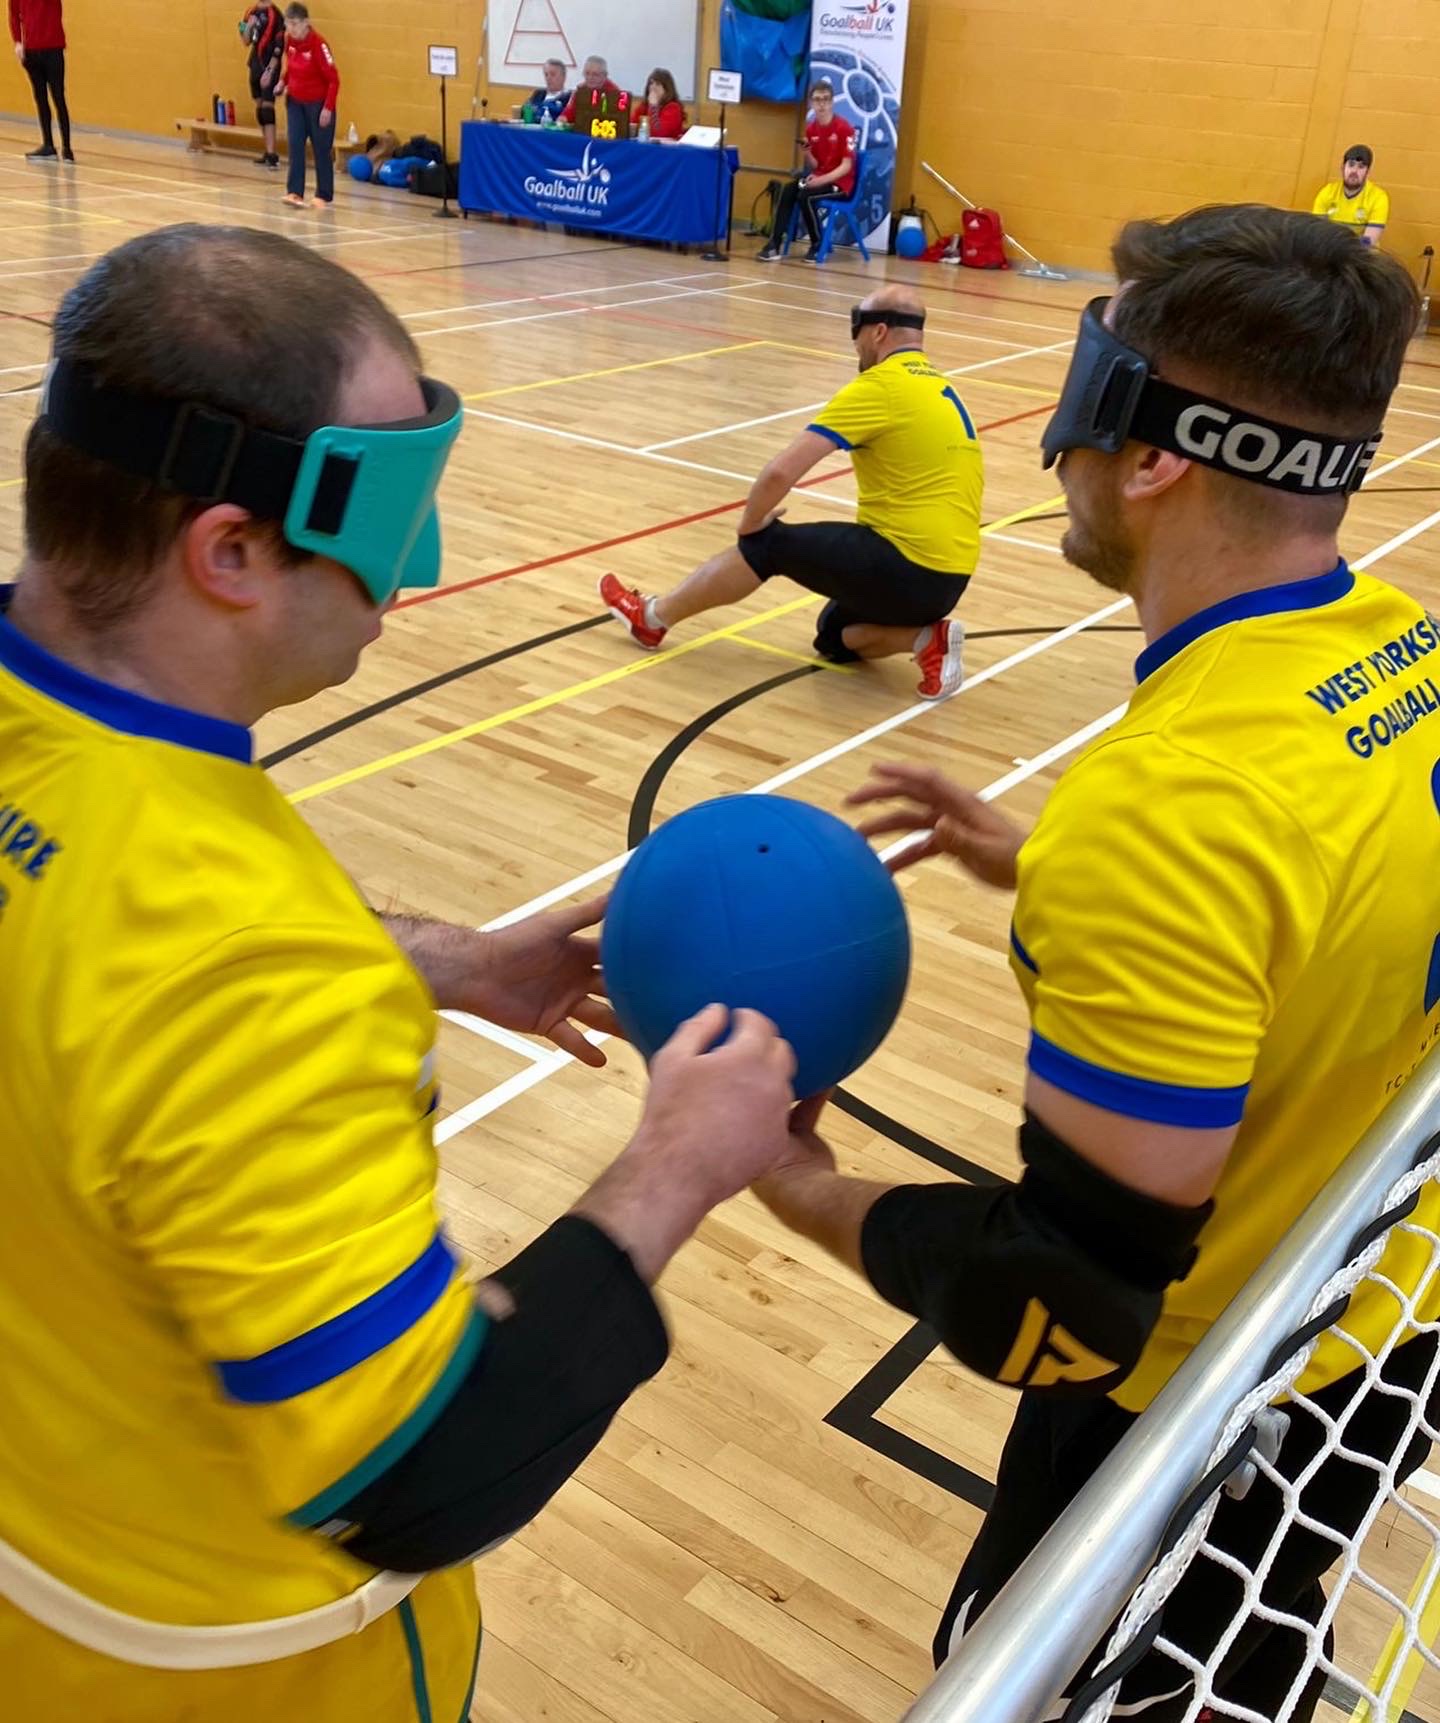 Two West Yorkshire players on the left post, with one player holding the goalball preparing to run to shoot.